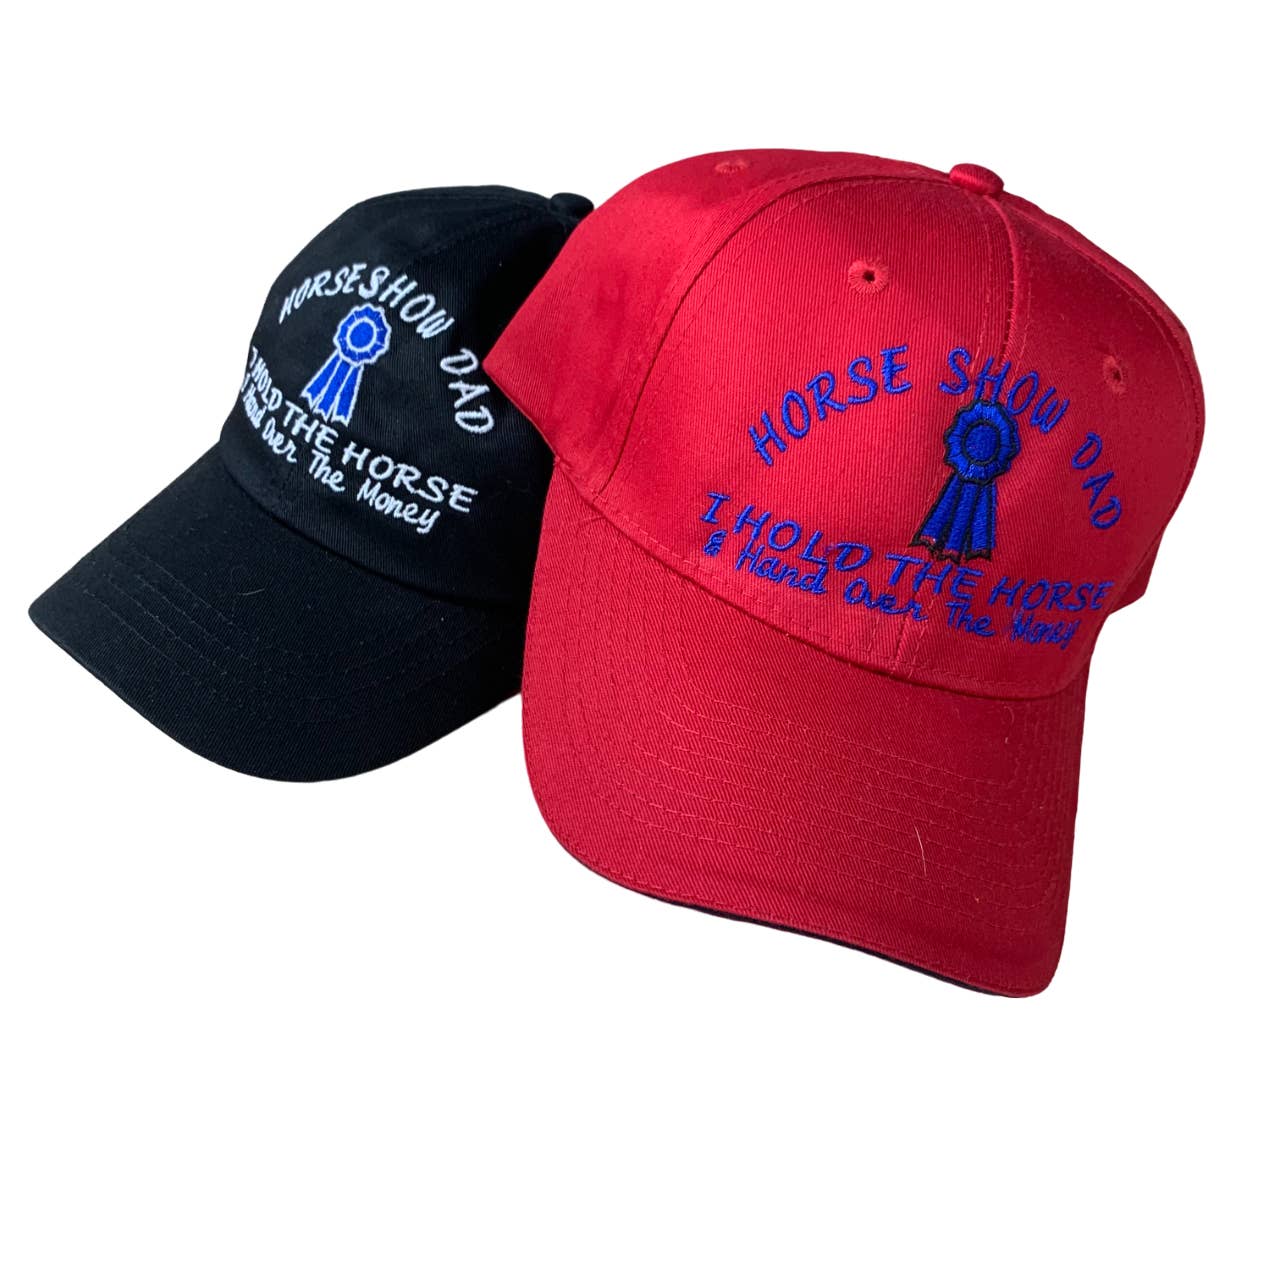 'Horse Show Dad' Embroidered Equestrian Baseball Cap - One Size